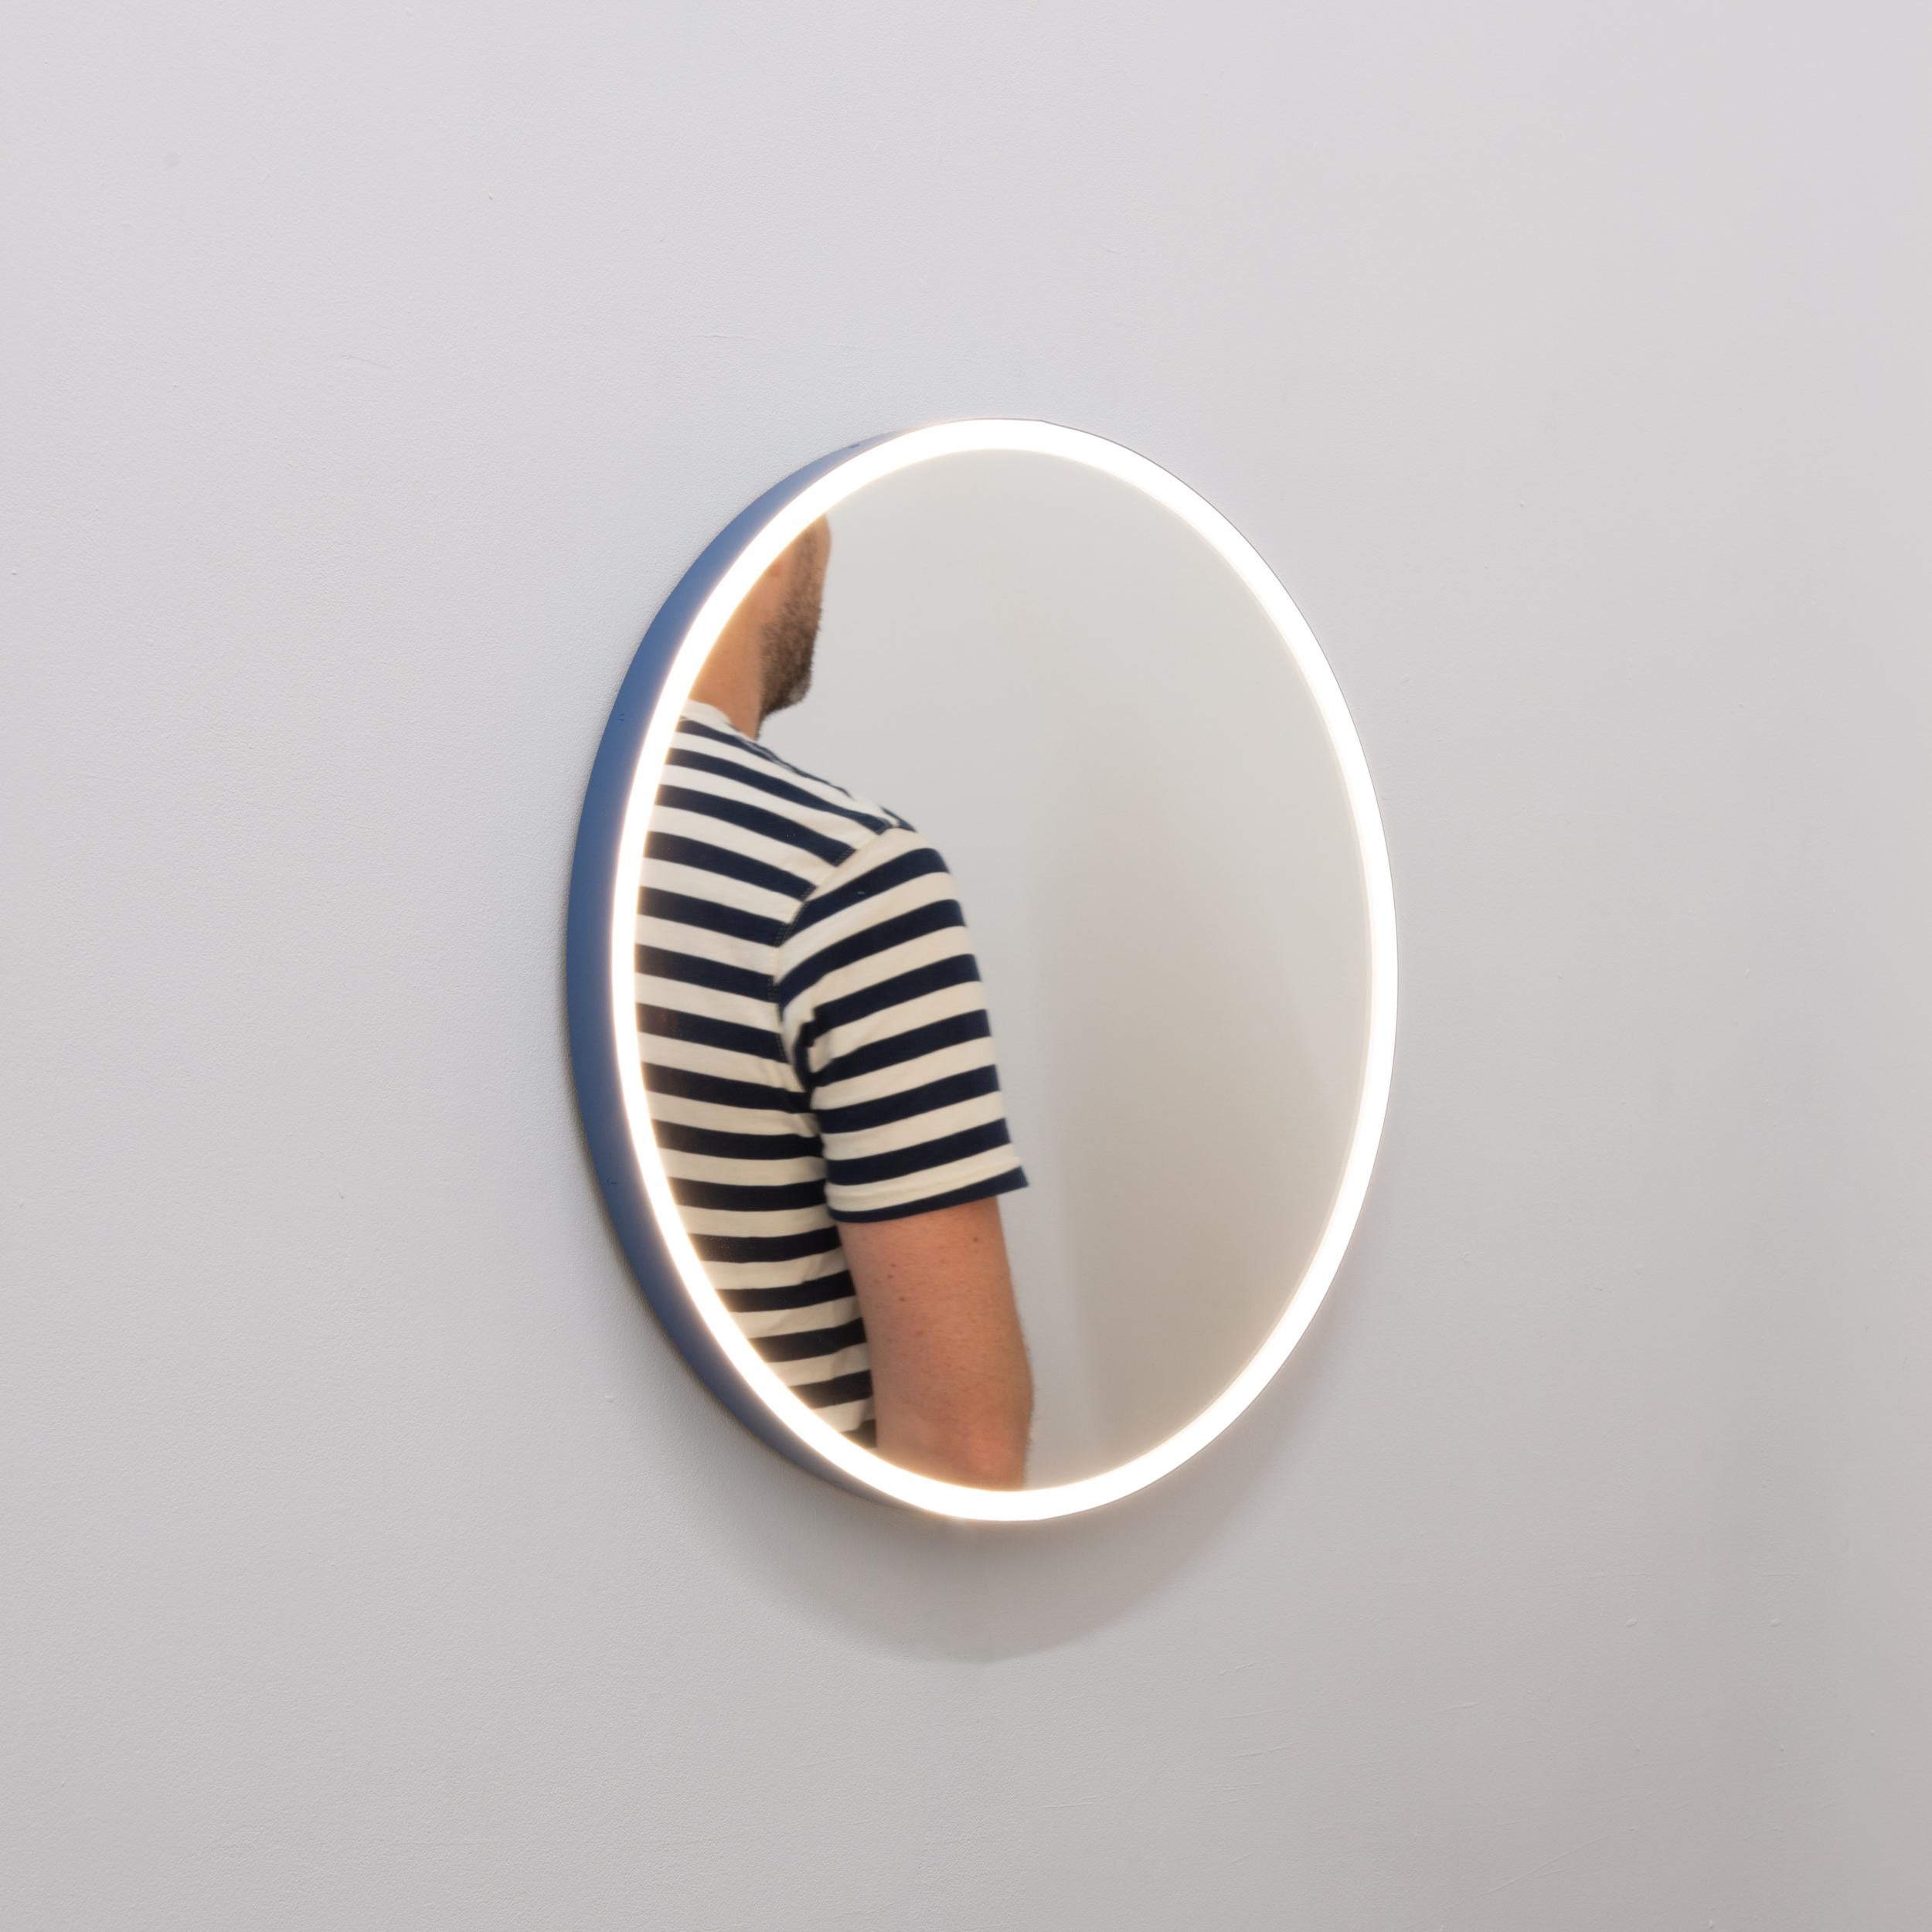 Orbis Front Illuminated Round Contemporary Mirror with Blue Frame, Medium In New Condition For Sale In London, GB